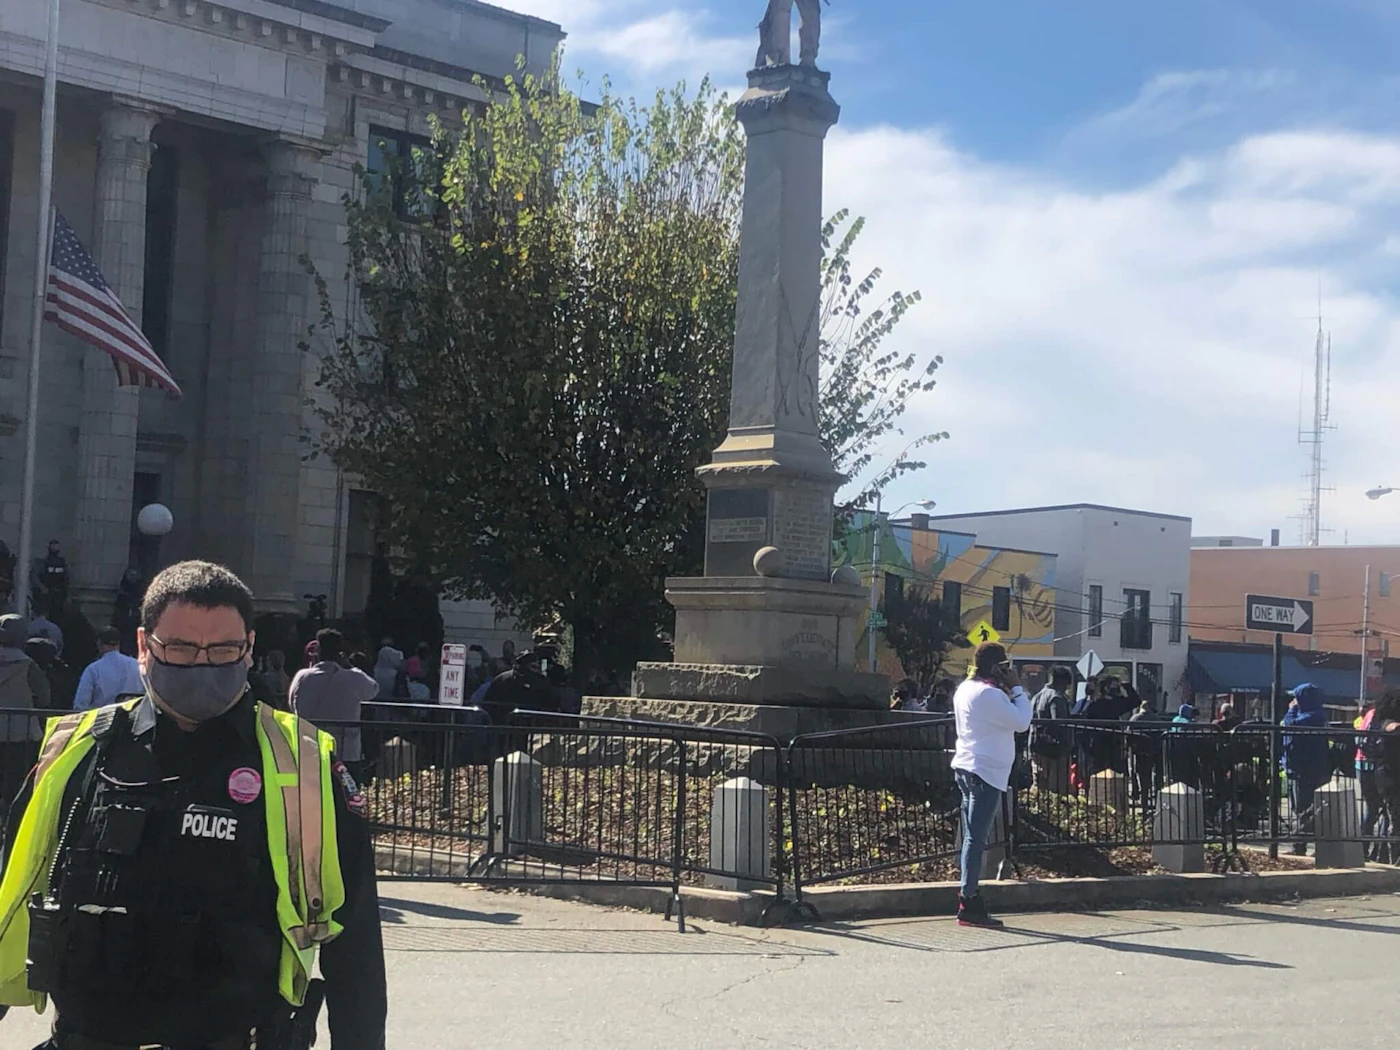 Police fired pepper spray into a voter turnout and racial injustice rally Saturday in Alamance County. (Photo by Sarah Ovaska)